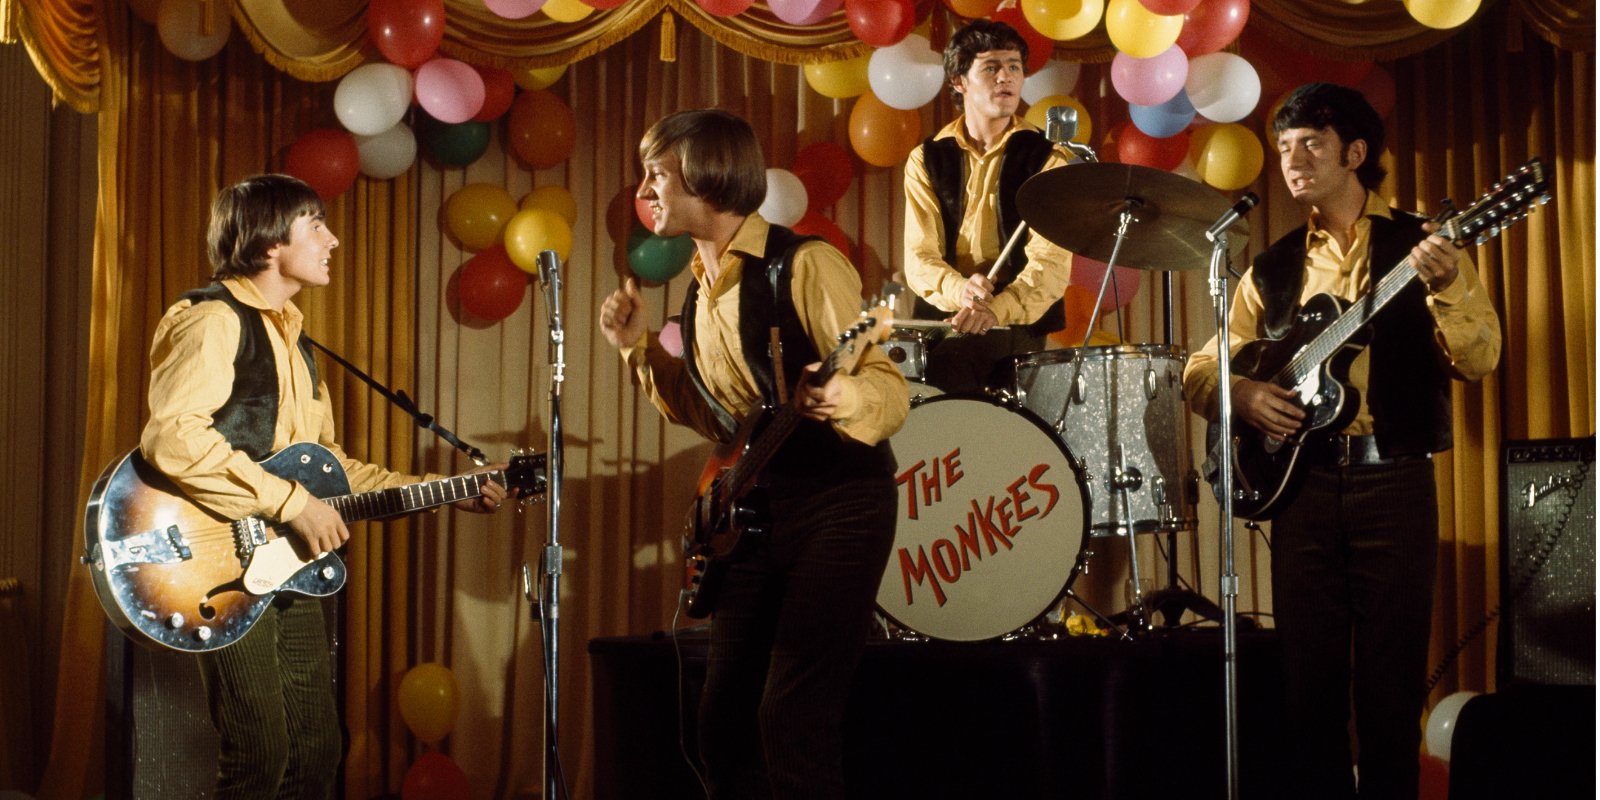 The Monkees on the set of their television series in 1966.